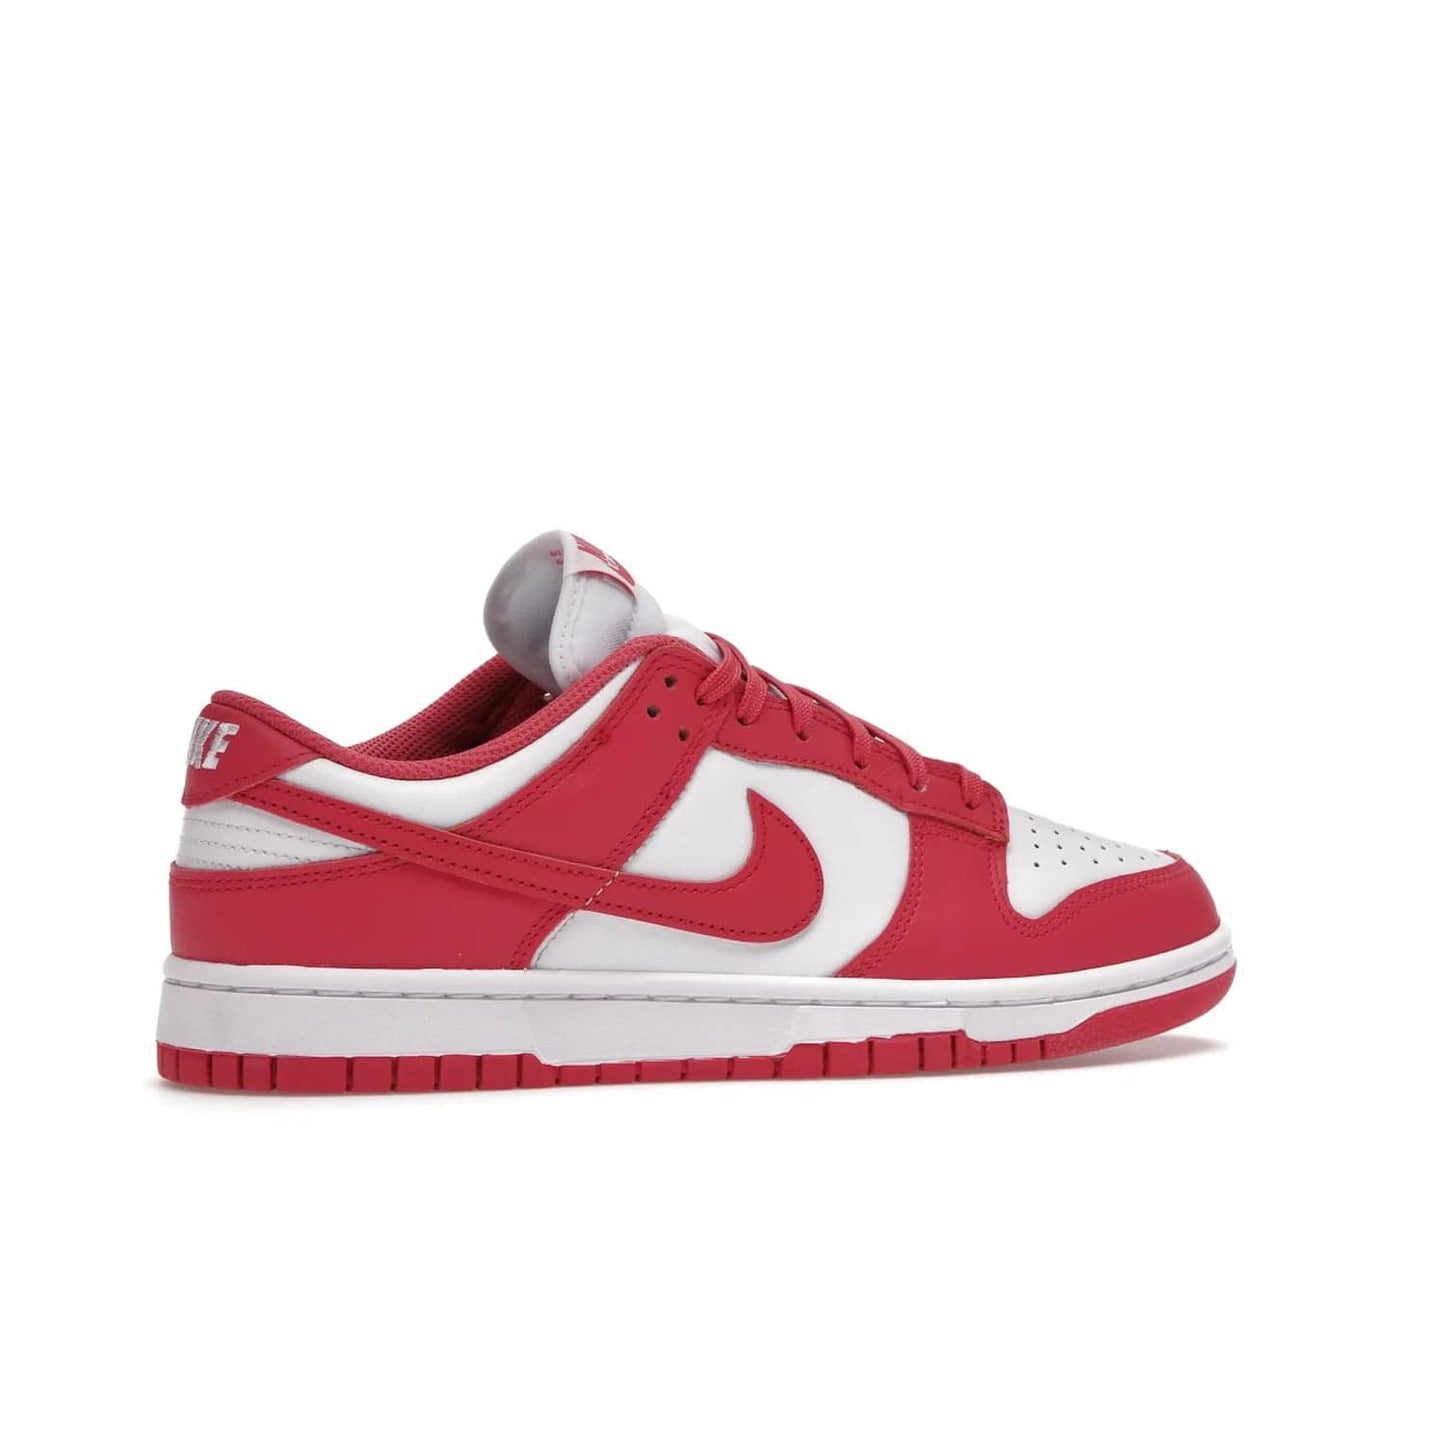 Nike Dunk Low Archeo Pink (Women's) - Image 35 - Only at www.BallersClubKickz.com - Introducing the stylish and comfortable Nike Dunk Low Archeo Pink (Women's). White/Archeo Pink colorway with white leather upper, pink overlays and Swooshes. Get yours now!